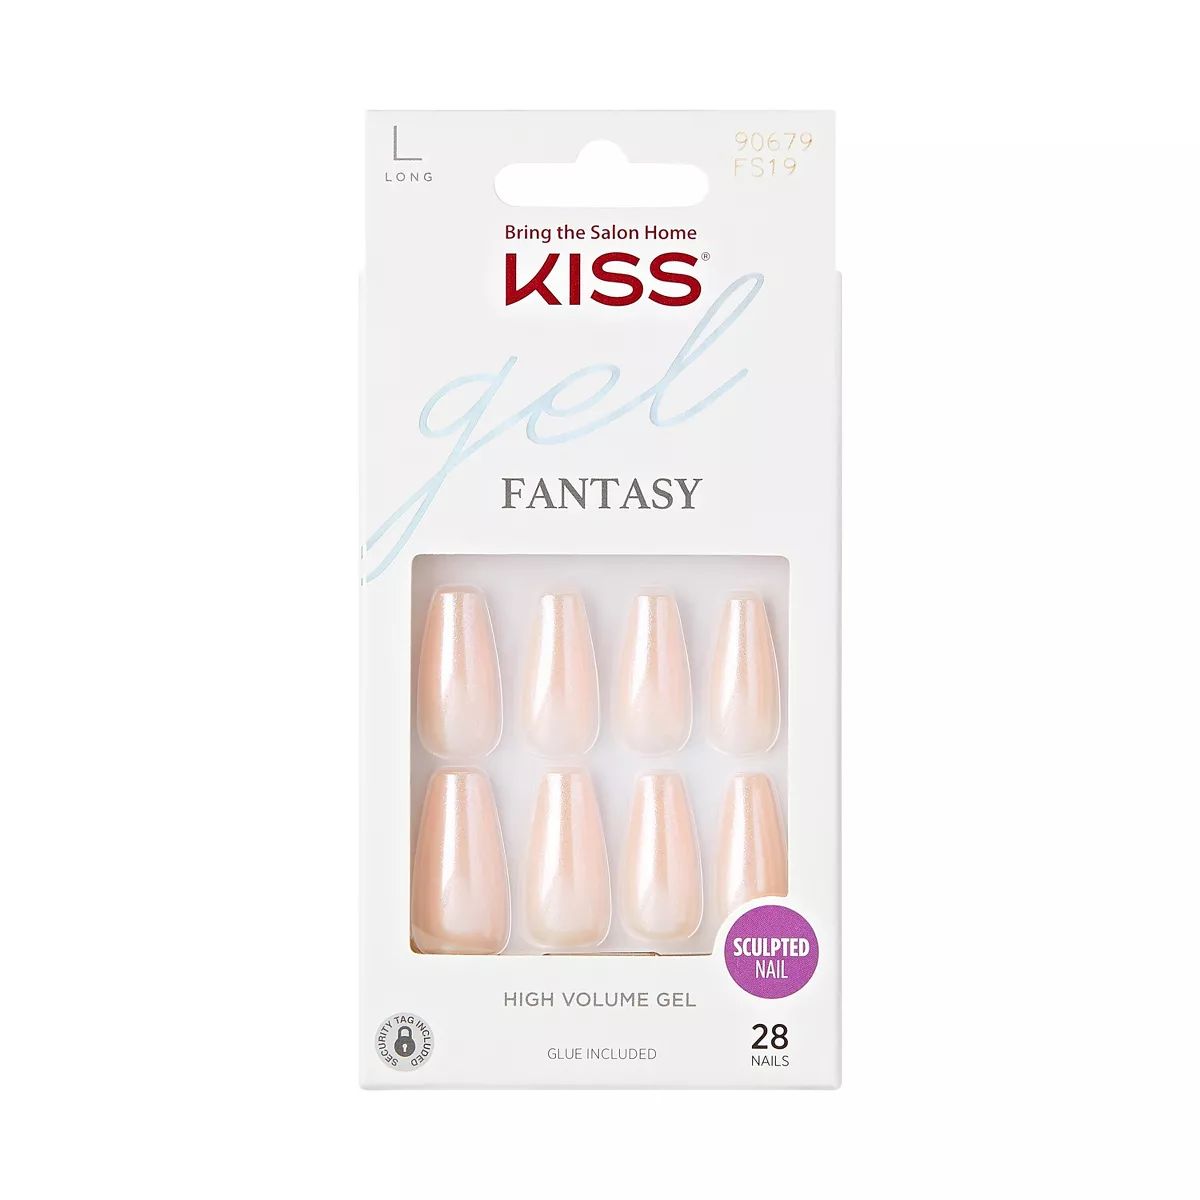 KISS Products Fake Nails - Hold Me Closer - 31ct | Target